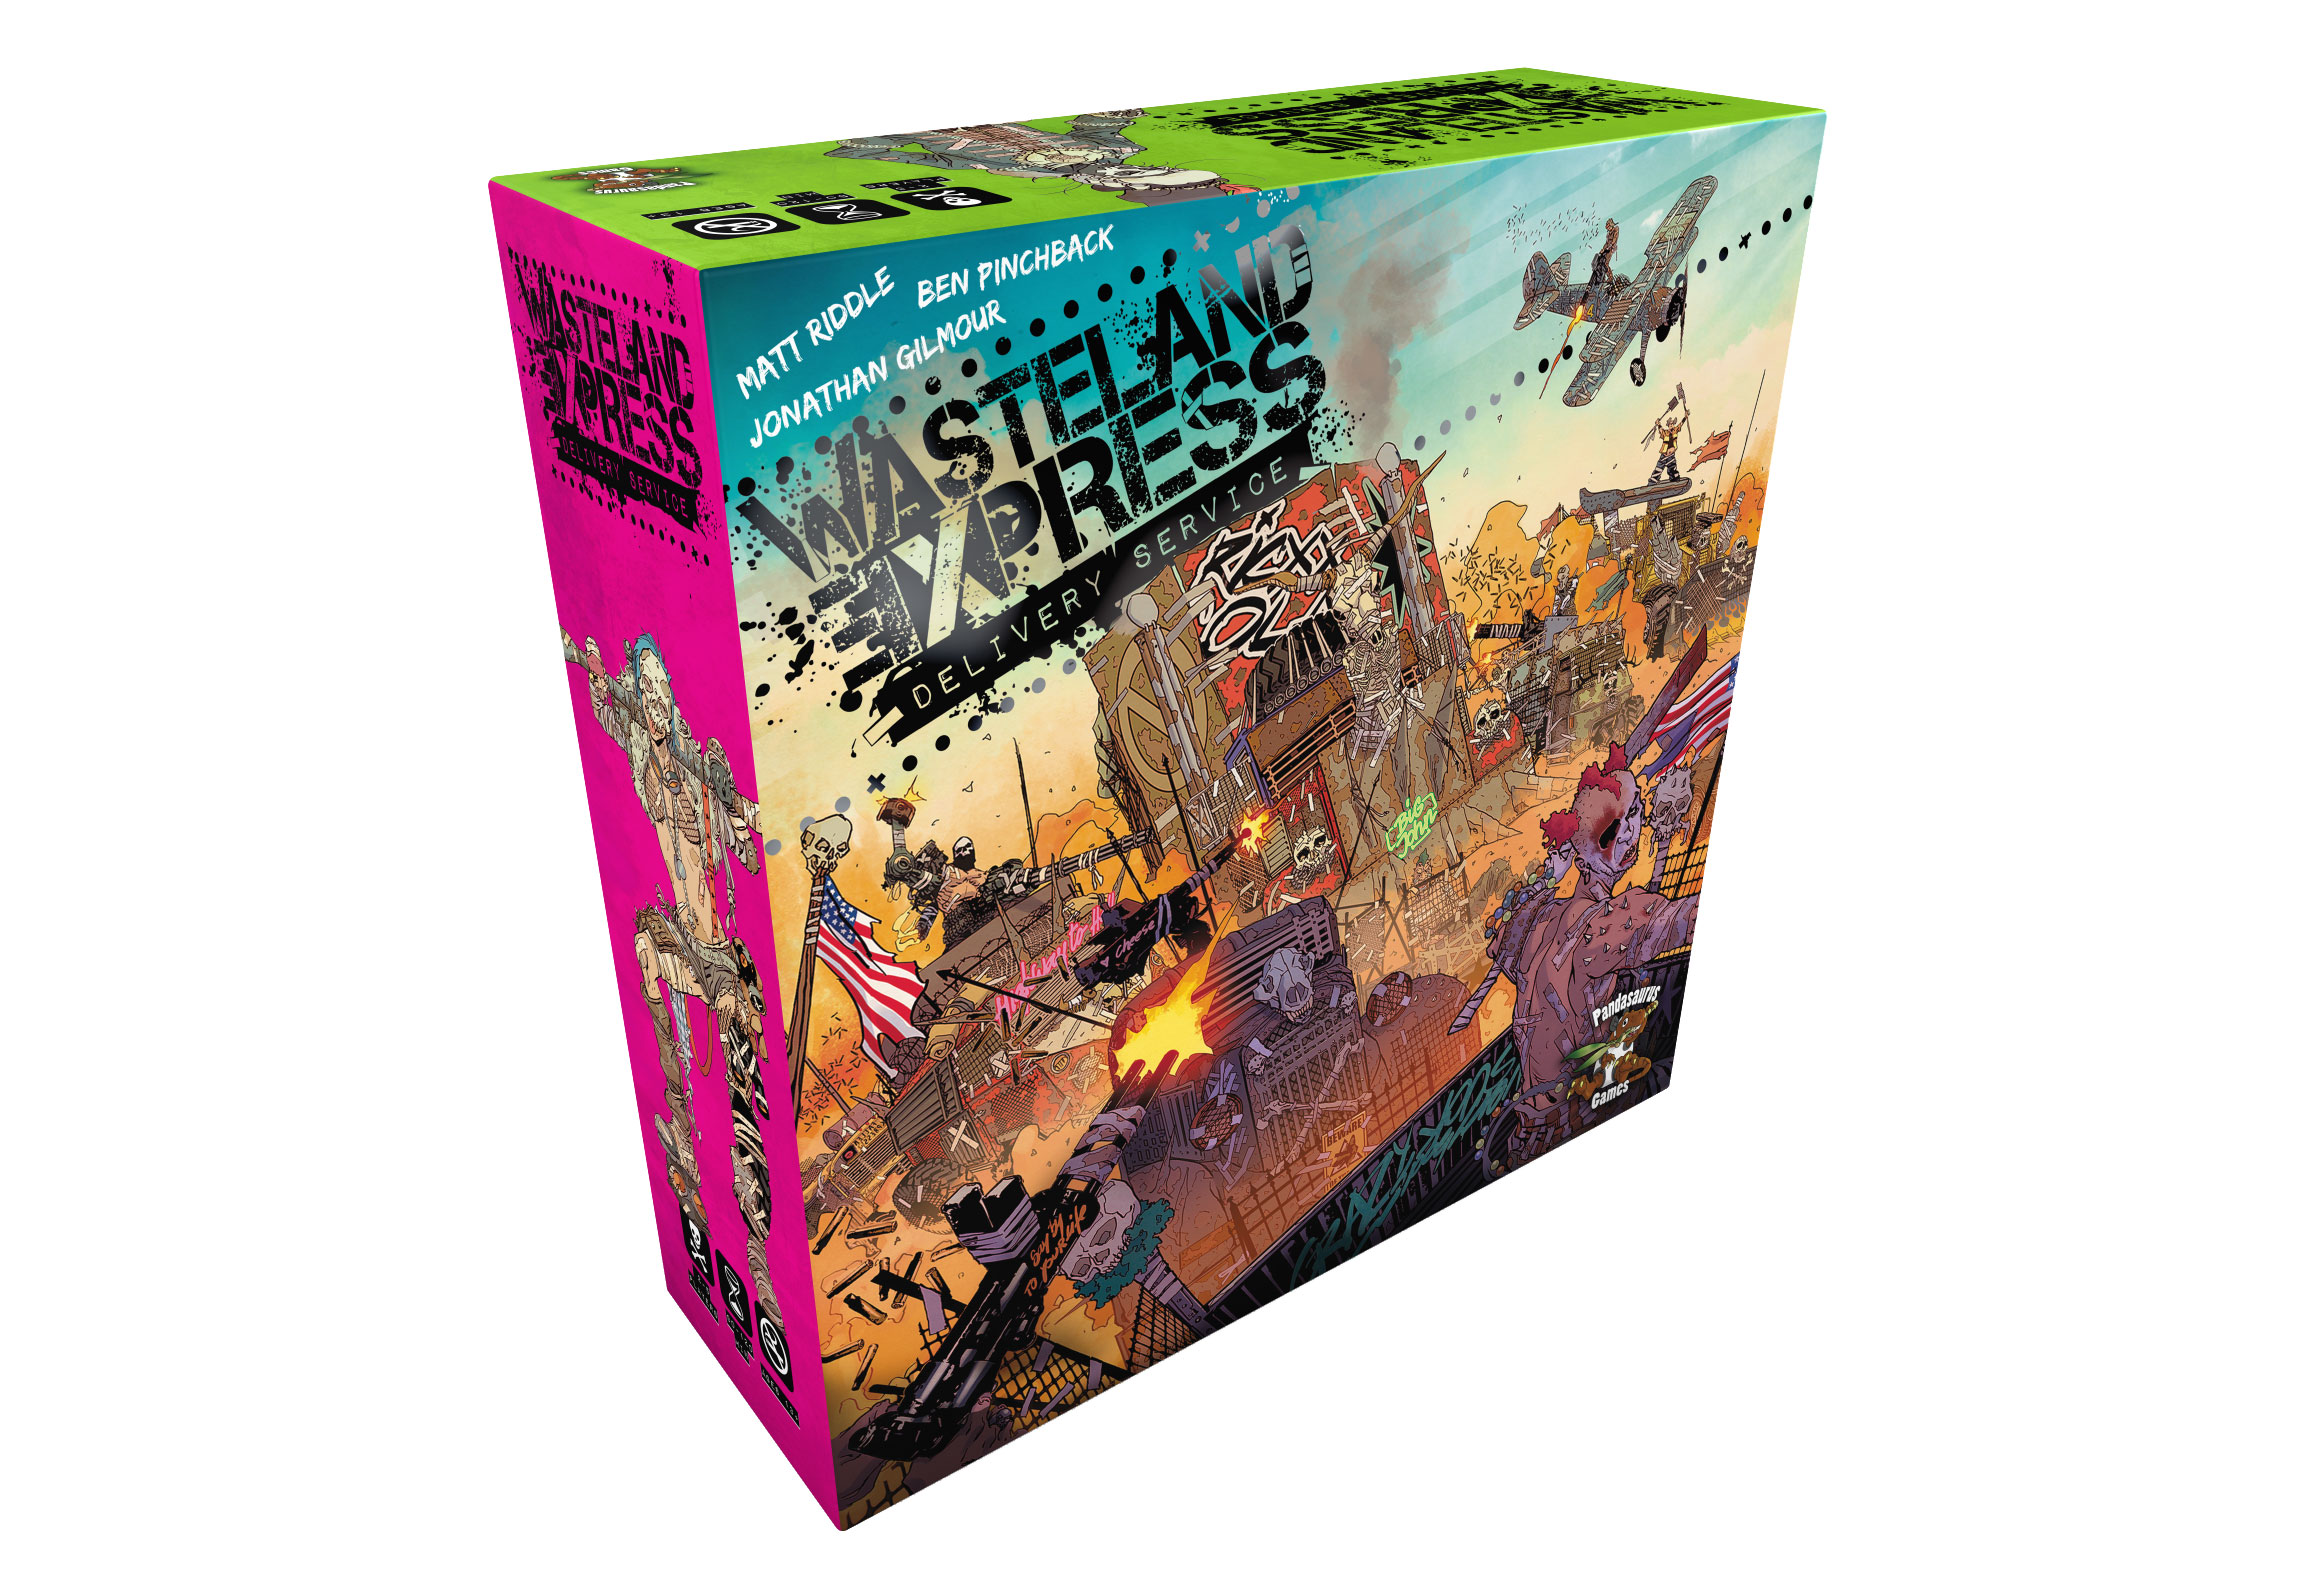 Wasteland Express Delivery Service: The Kotaku Review